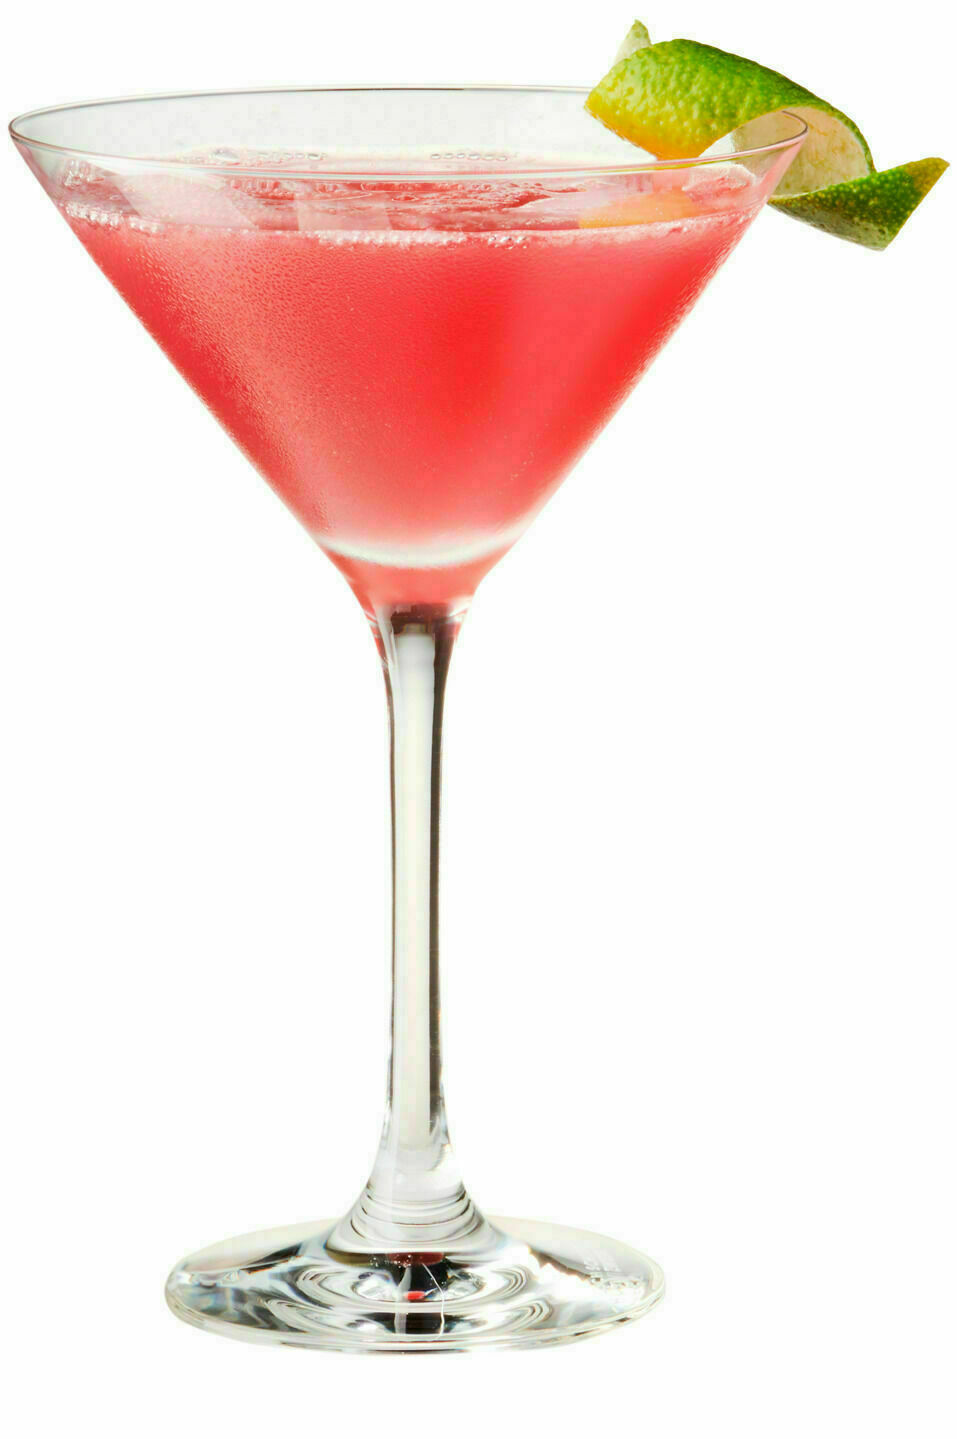 How to Make the Cosmopolitan